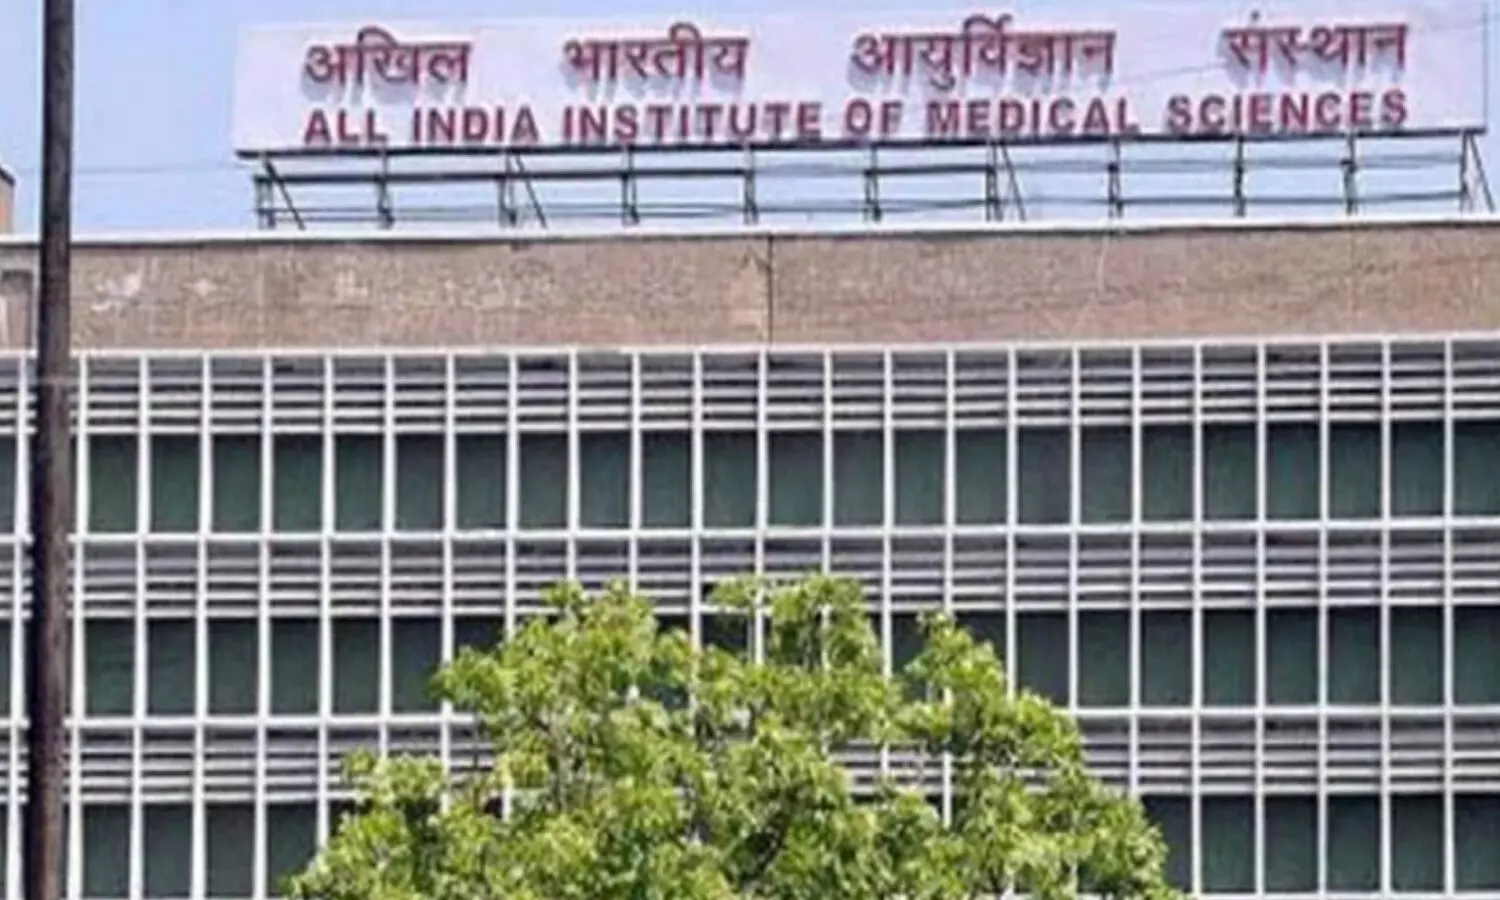 AIIMS RDA requests authorities for voluntary donations to PM CARES Fund